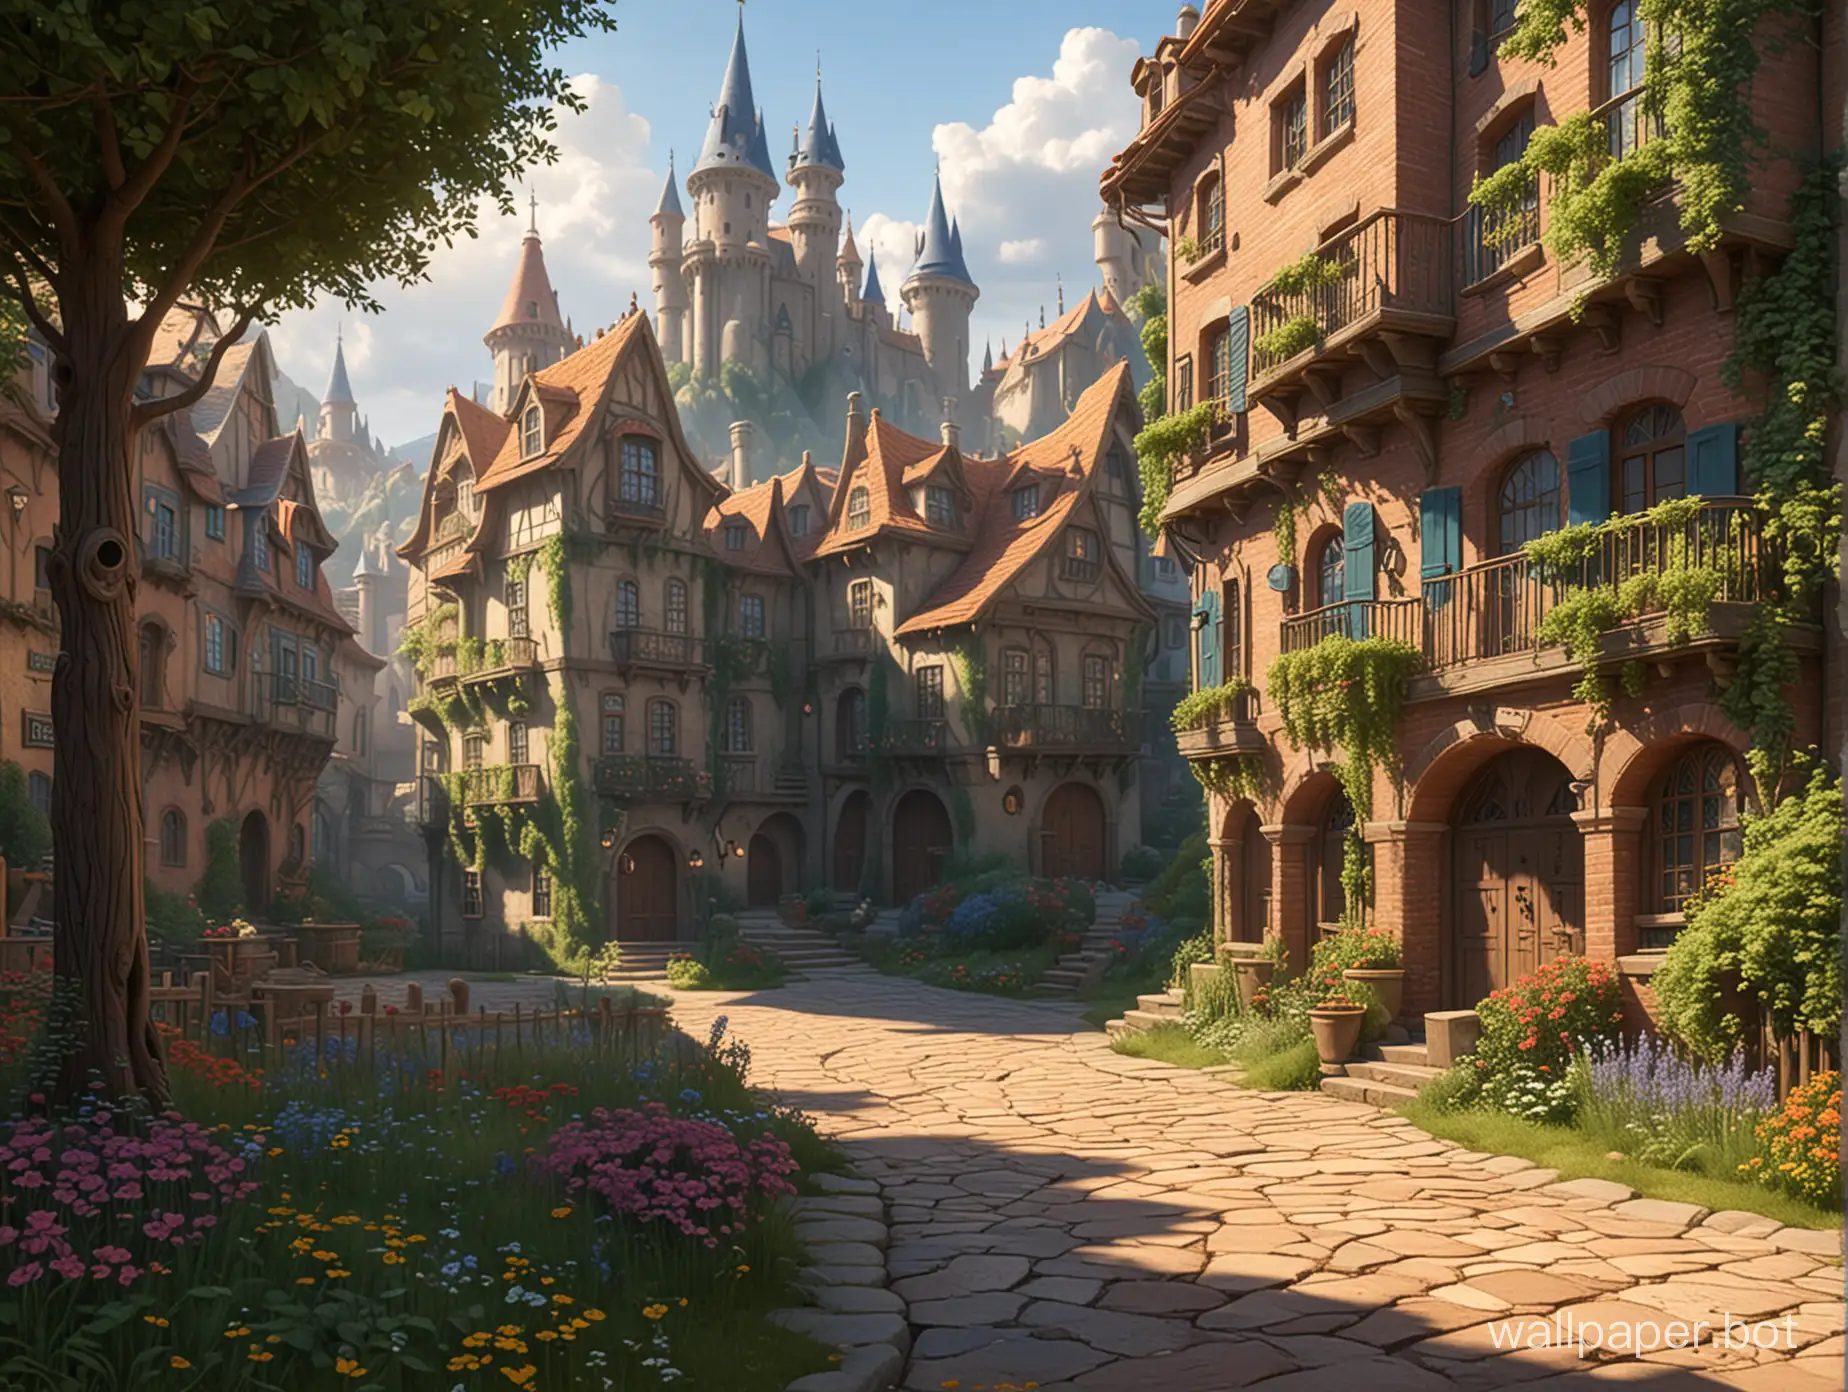 background environment from a Disney movie, realistic, and highly detailed.